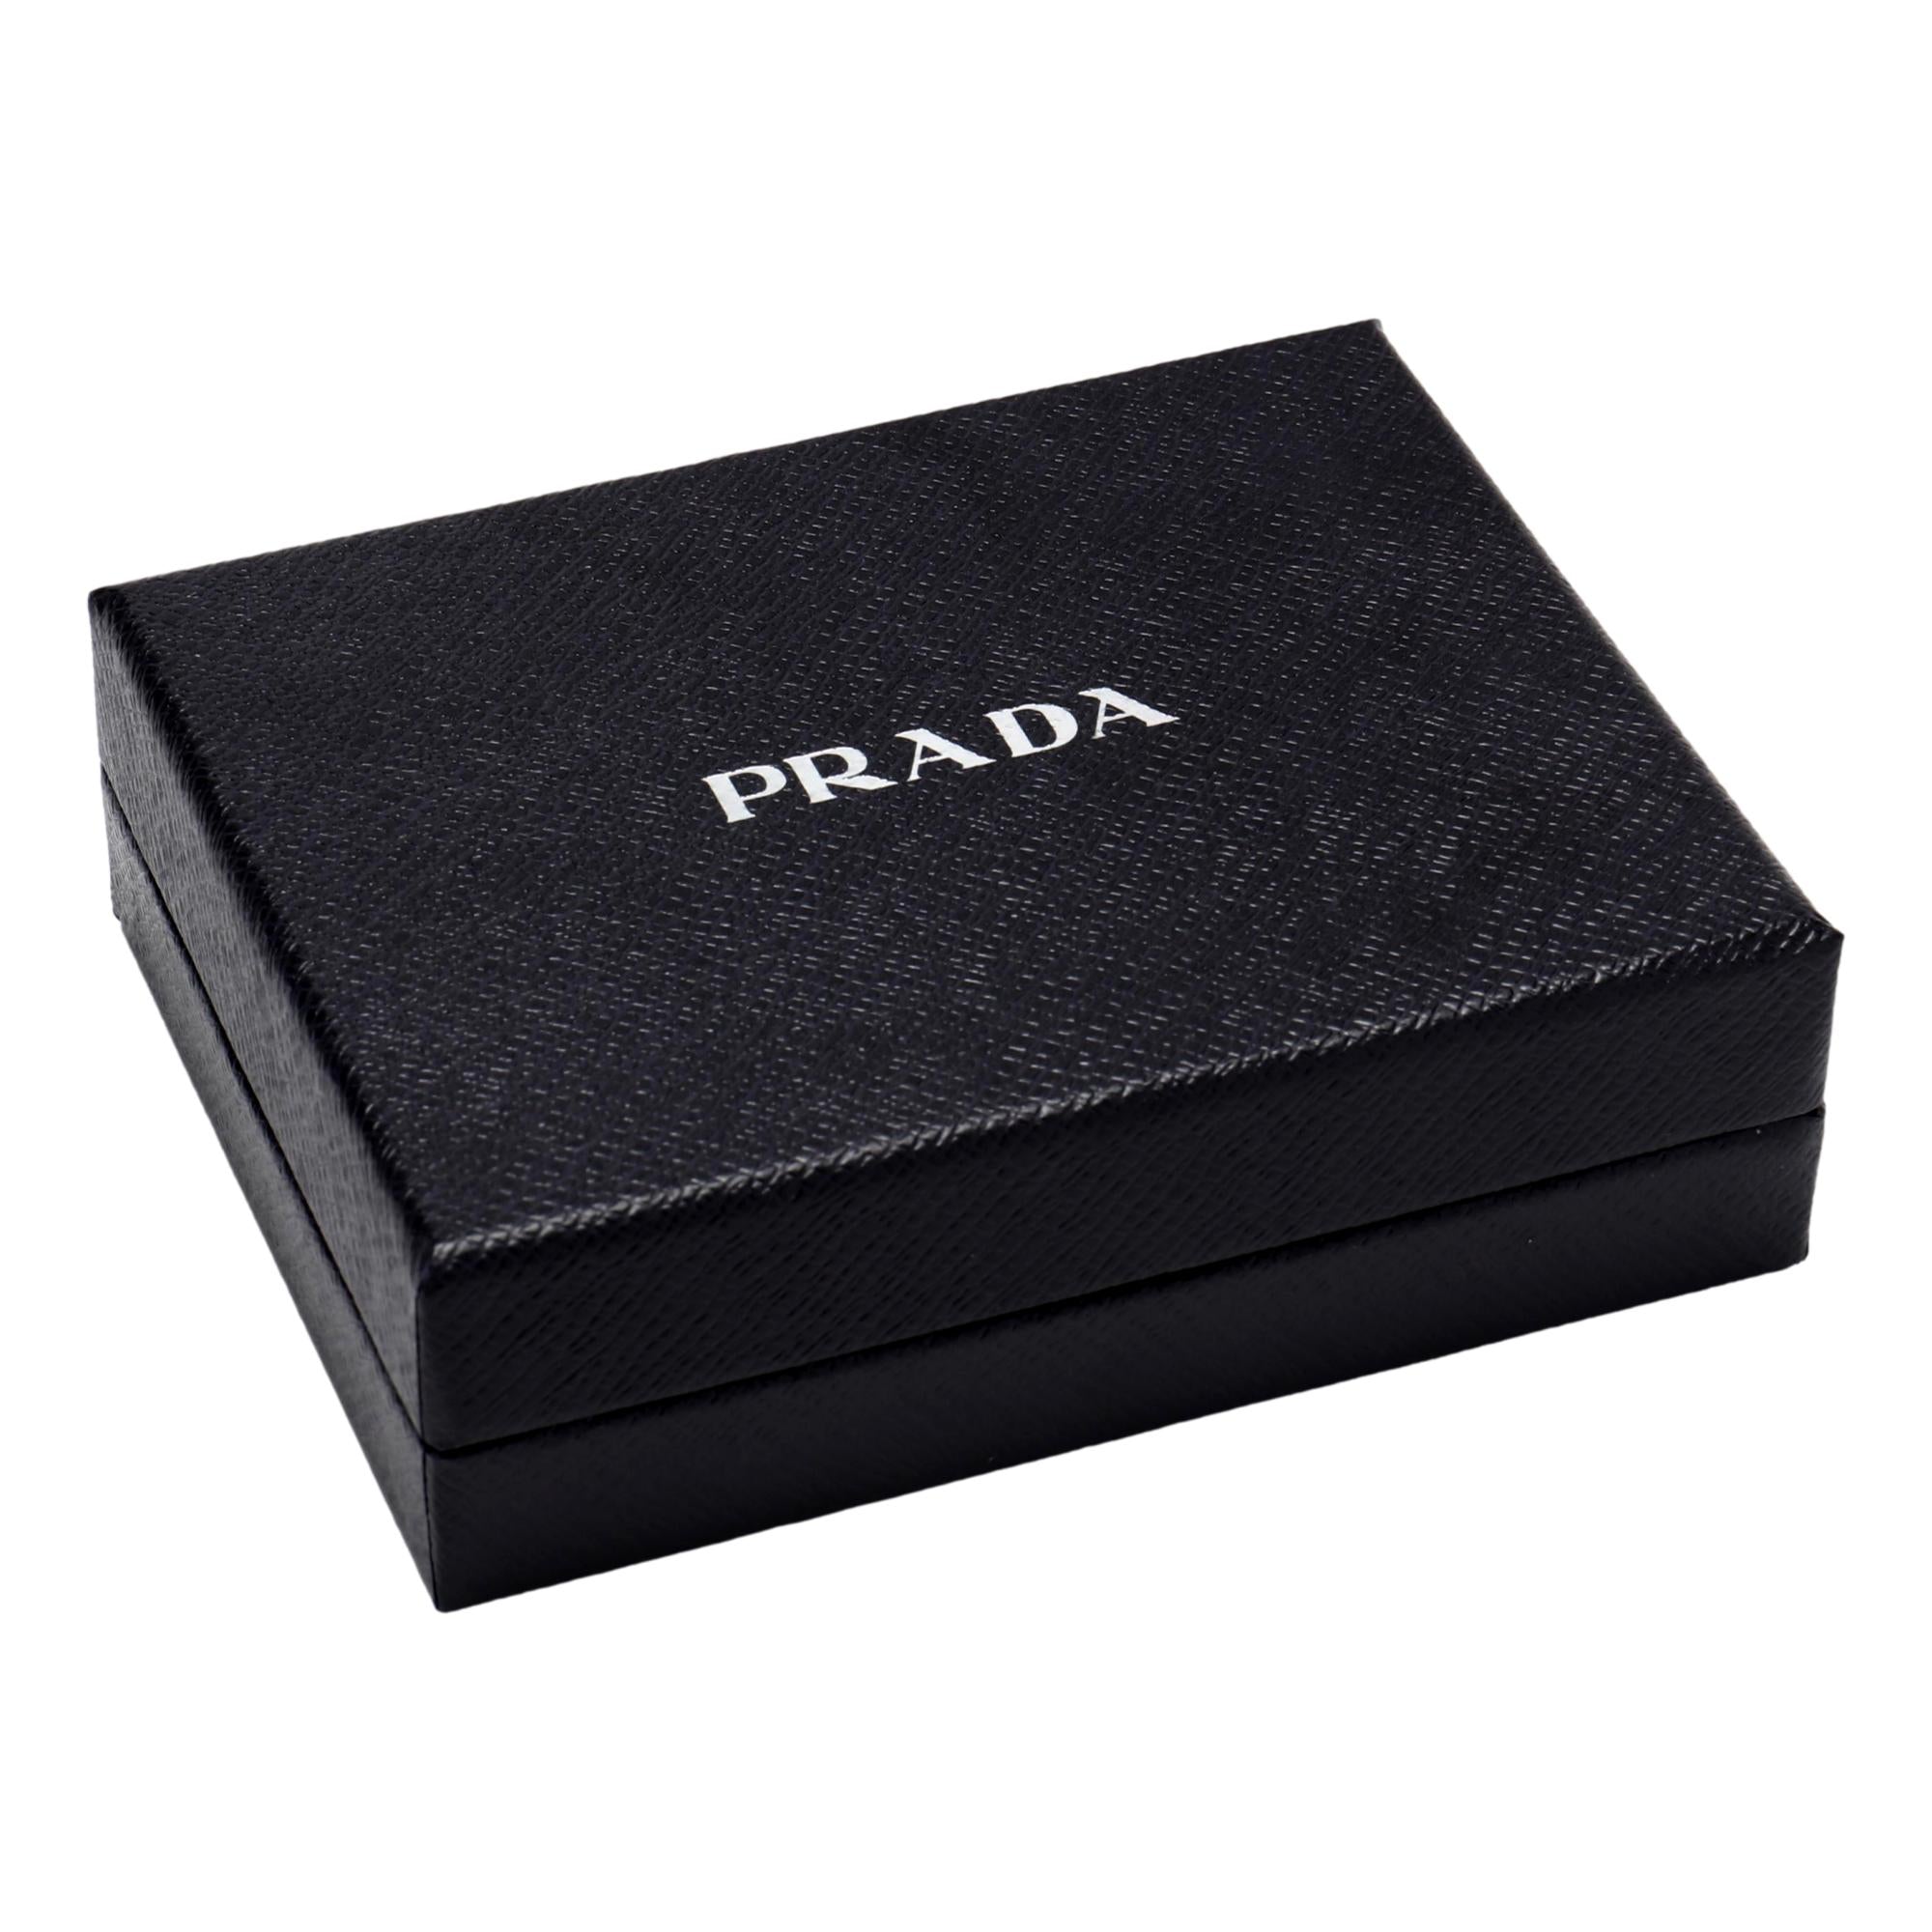 Prada Women's Wallet Saffiano Leather Tri Fold Black at_Queen_Bee_of_Beverly_Hills